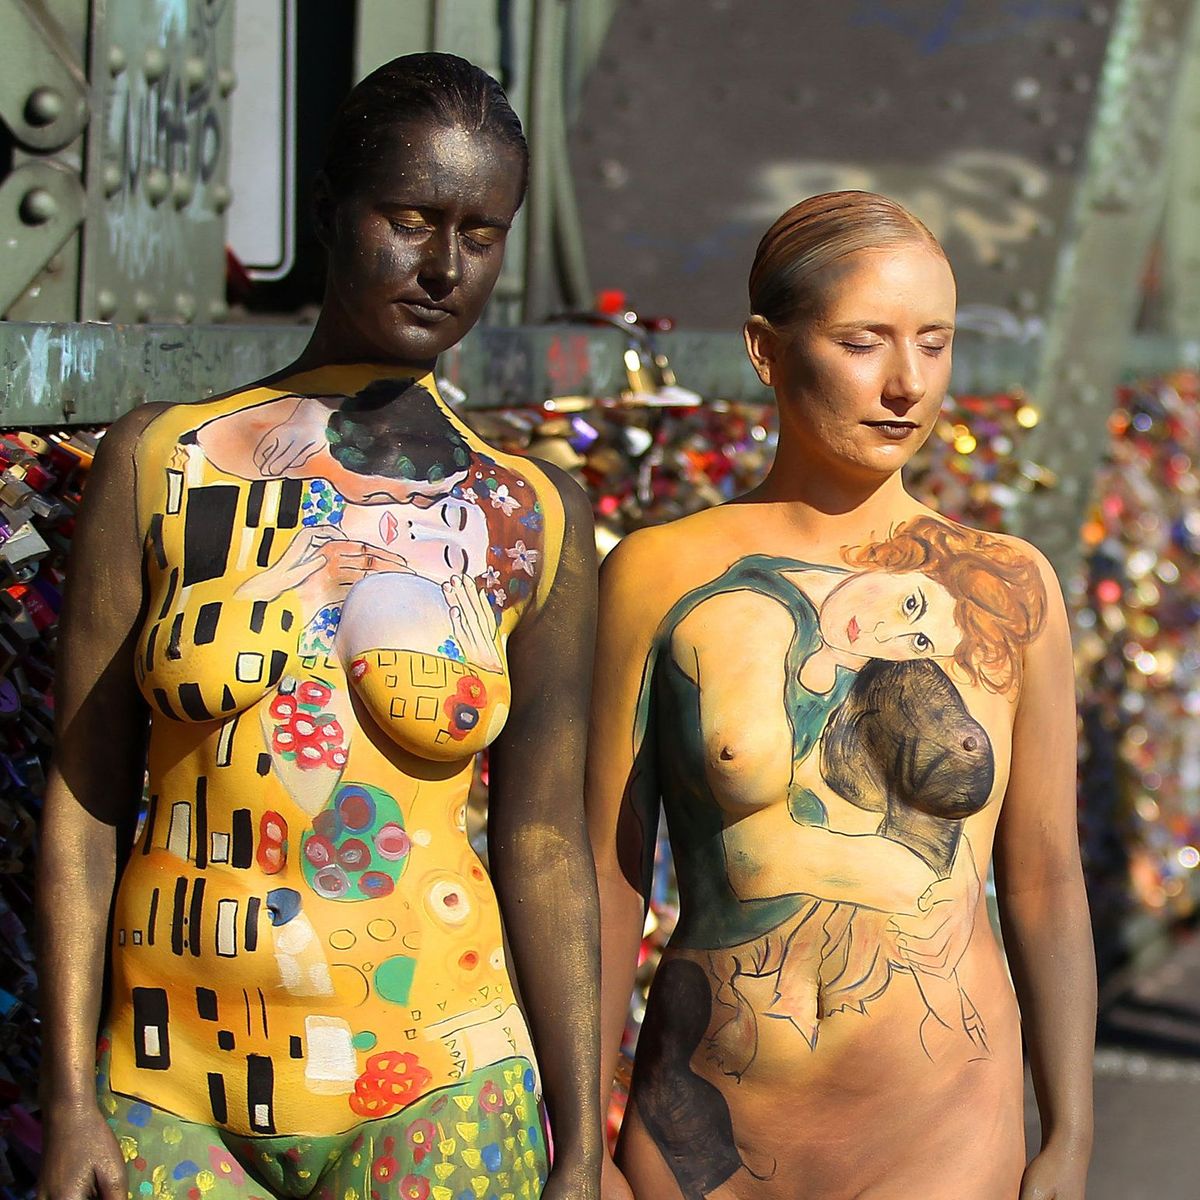 chanel lake recommends body painting nude women pic